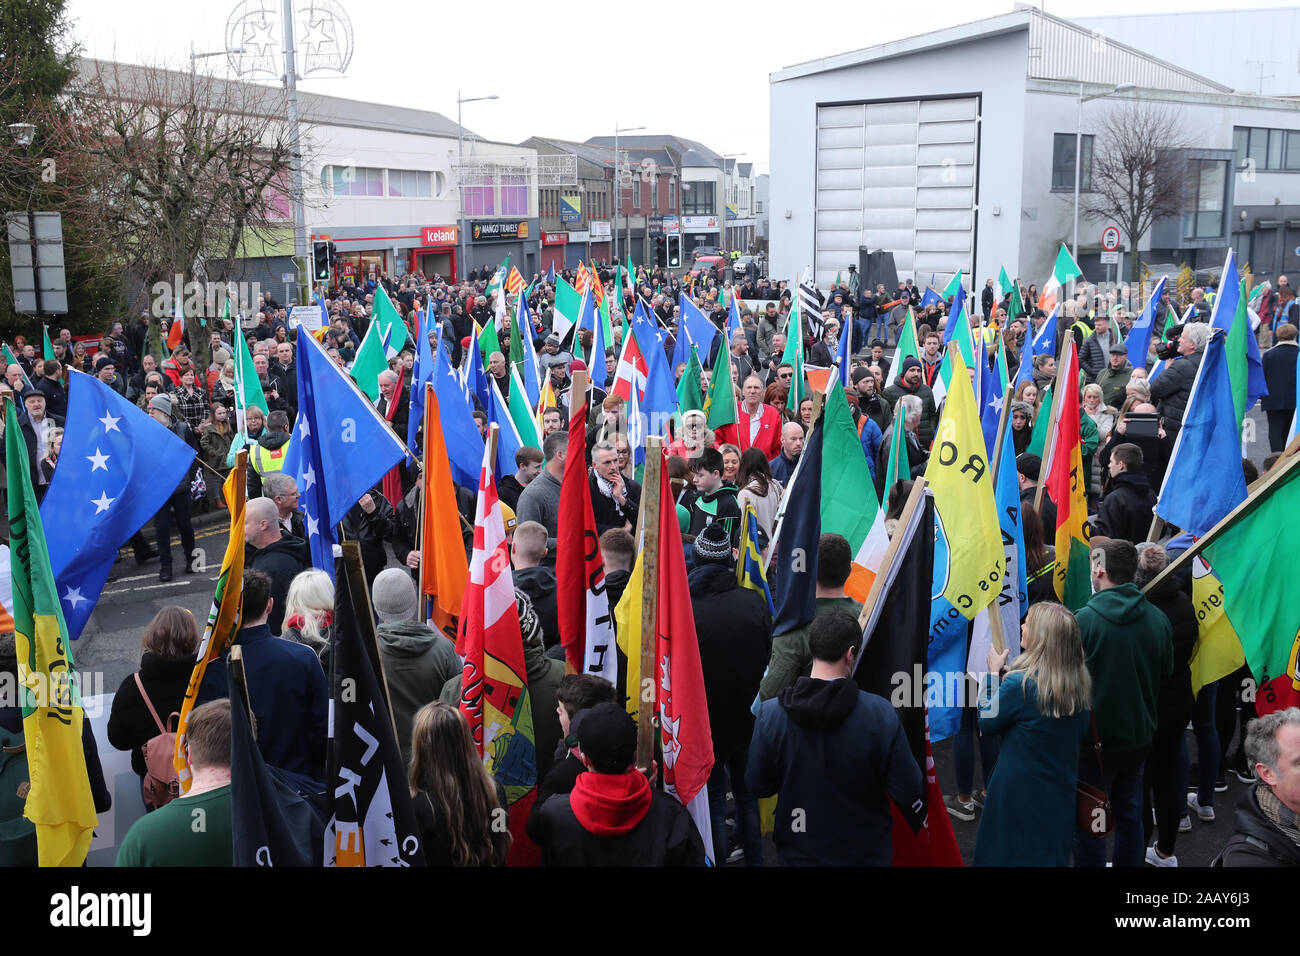 People take part in an Irish unity march after they crossed the Lifford Bridge, from Donegal, which marks the border between Strabane in County Tyrone, Northern Ireland, and Lifford in County Donegal in the Republic of Ireland. Stock Photo